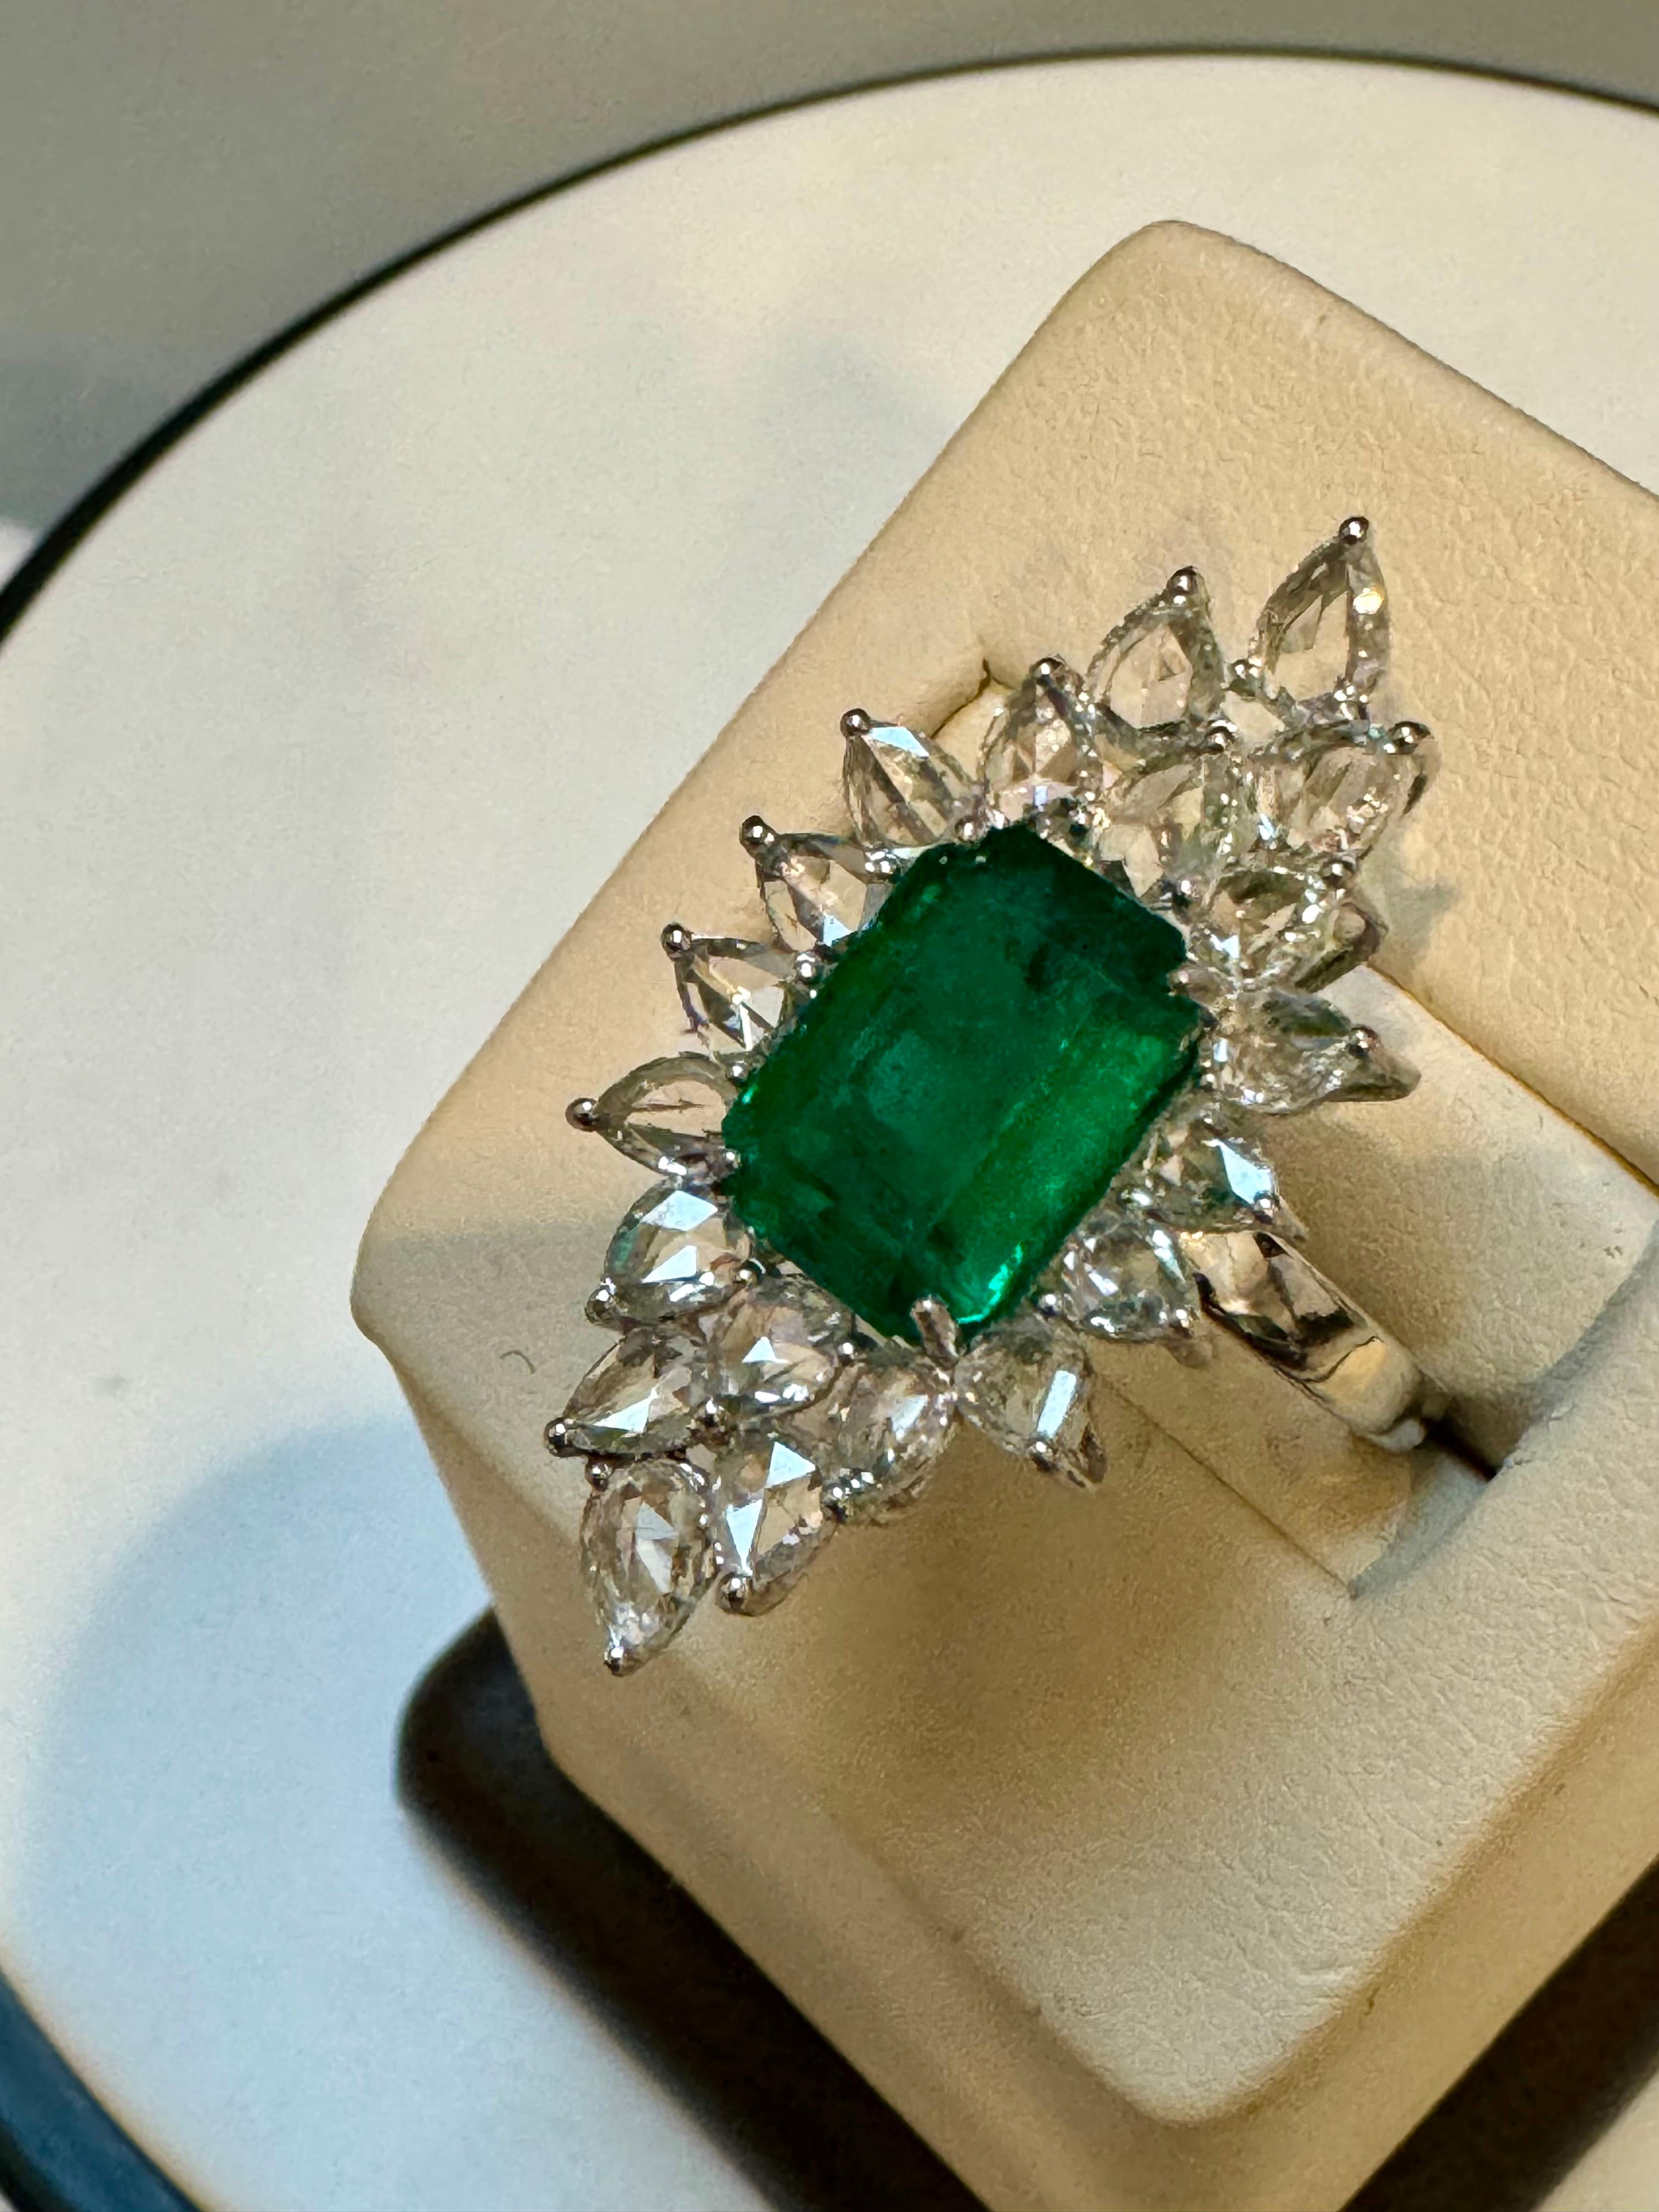 4Ct Finest Zambian Emerald Cut Emerald & 2.5Ct Diamond Ring, 18 Kt Gold Size 6.5 In Excellent Condition For Sale In New York, NY